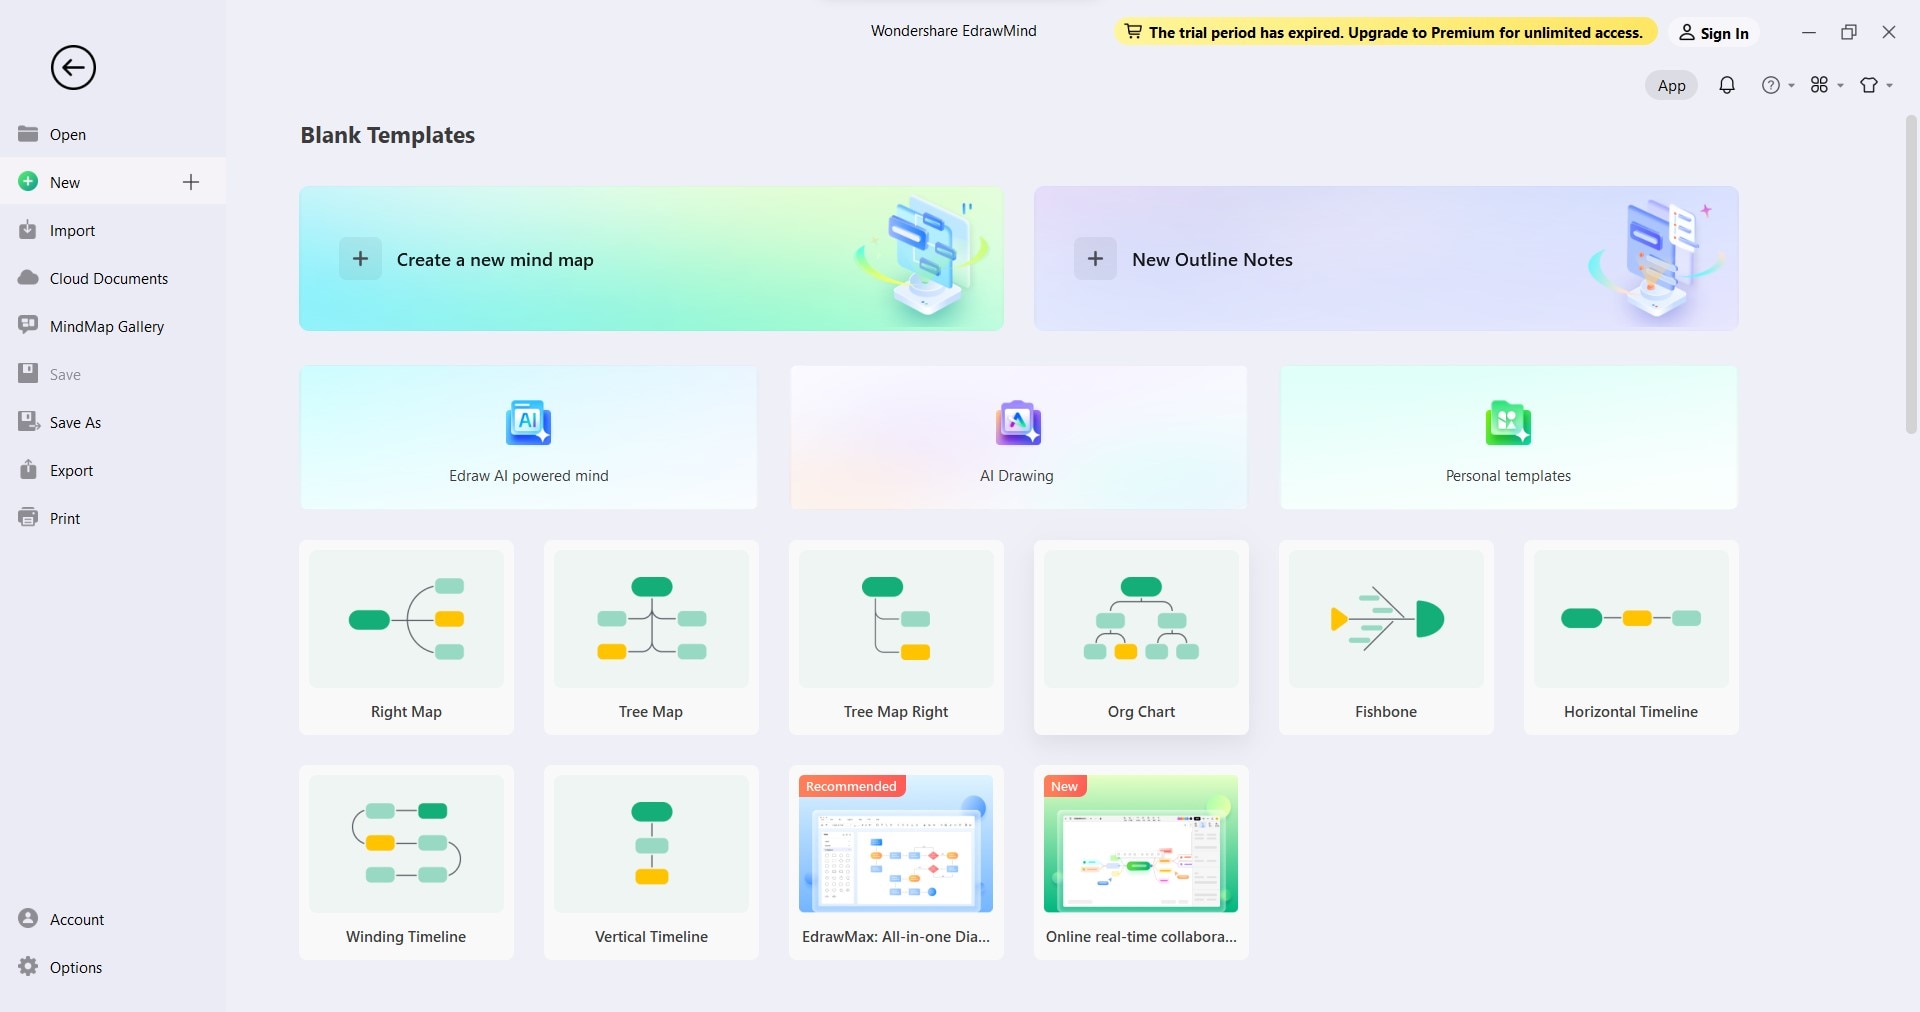 edrawmind homepage for new files